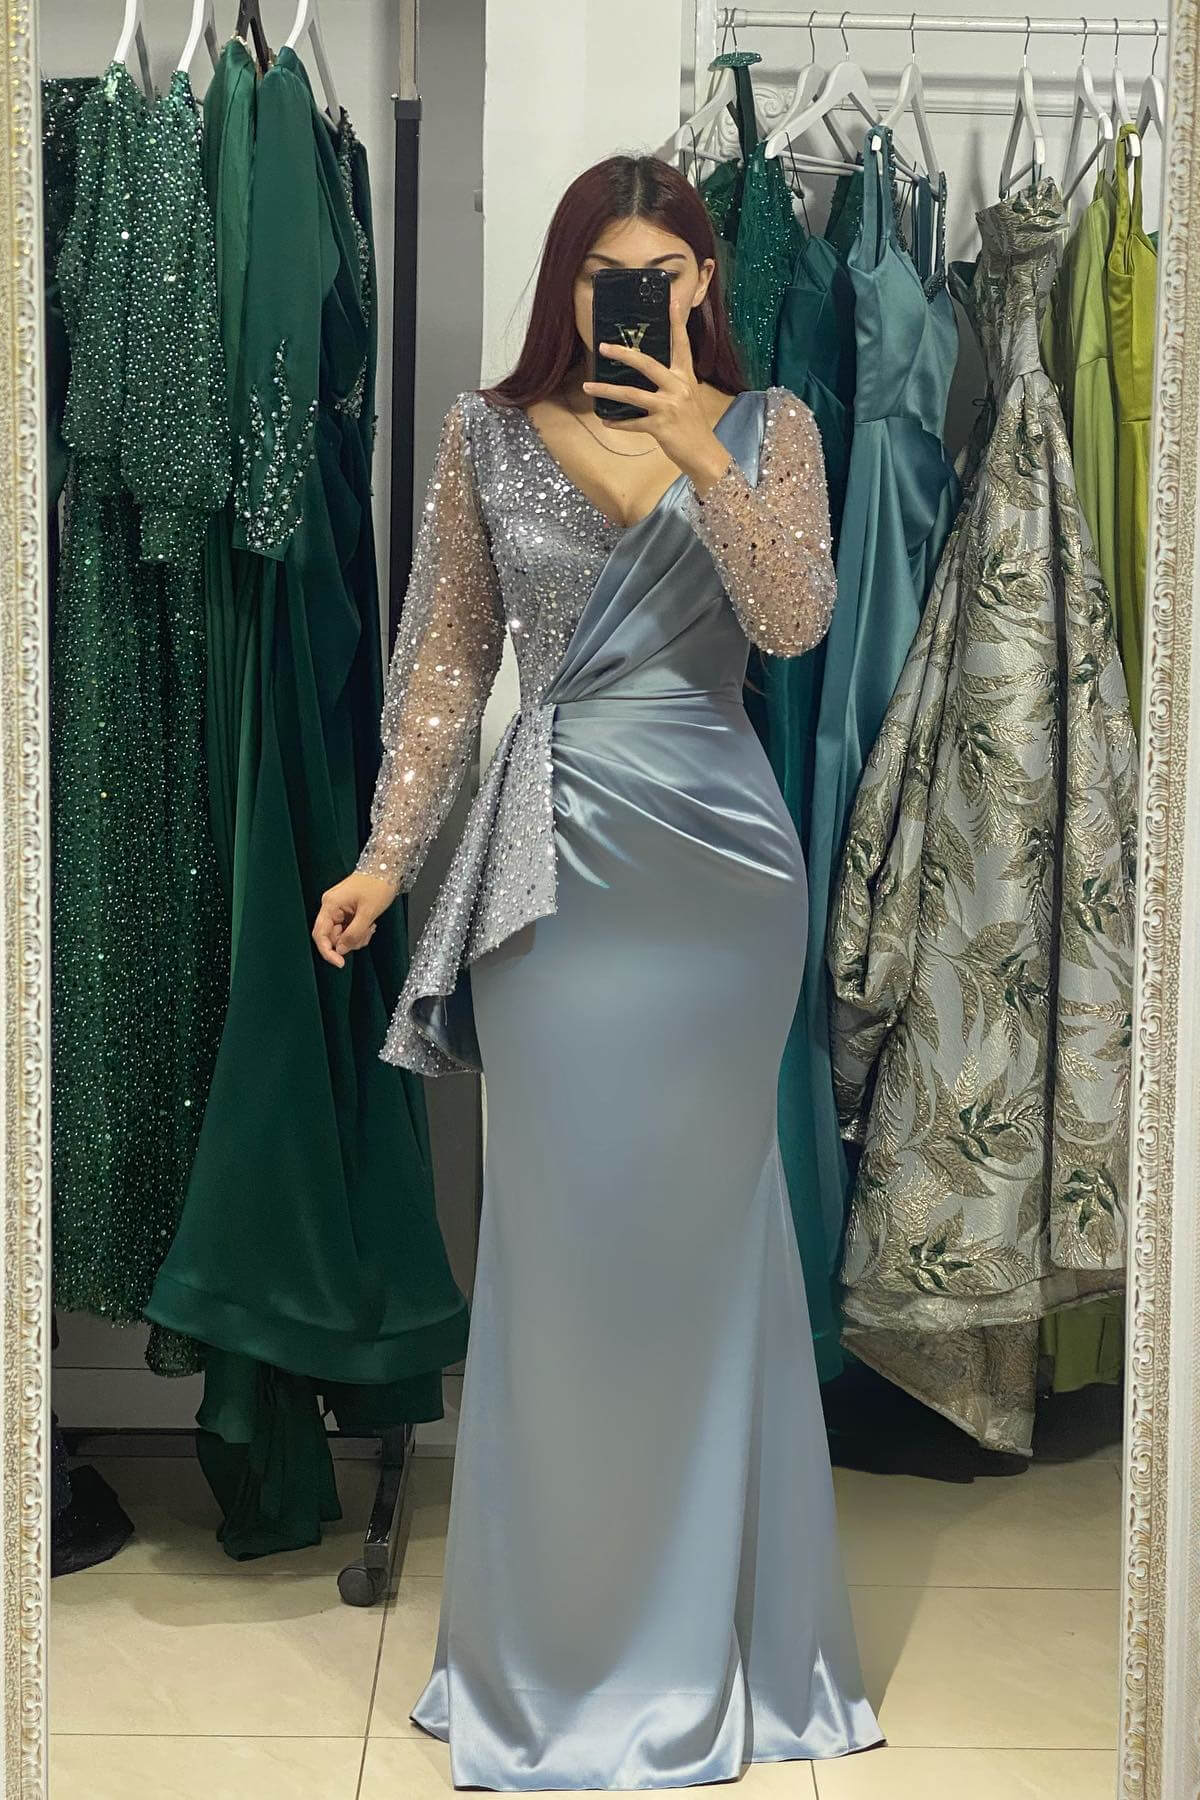 Chic Dusty Blue V-Neck Long Sleeves Mermaid Evening Gown With Sequins Pearls Beadings - lulusllly